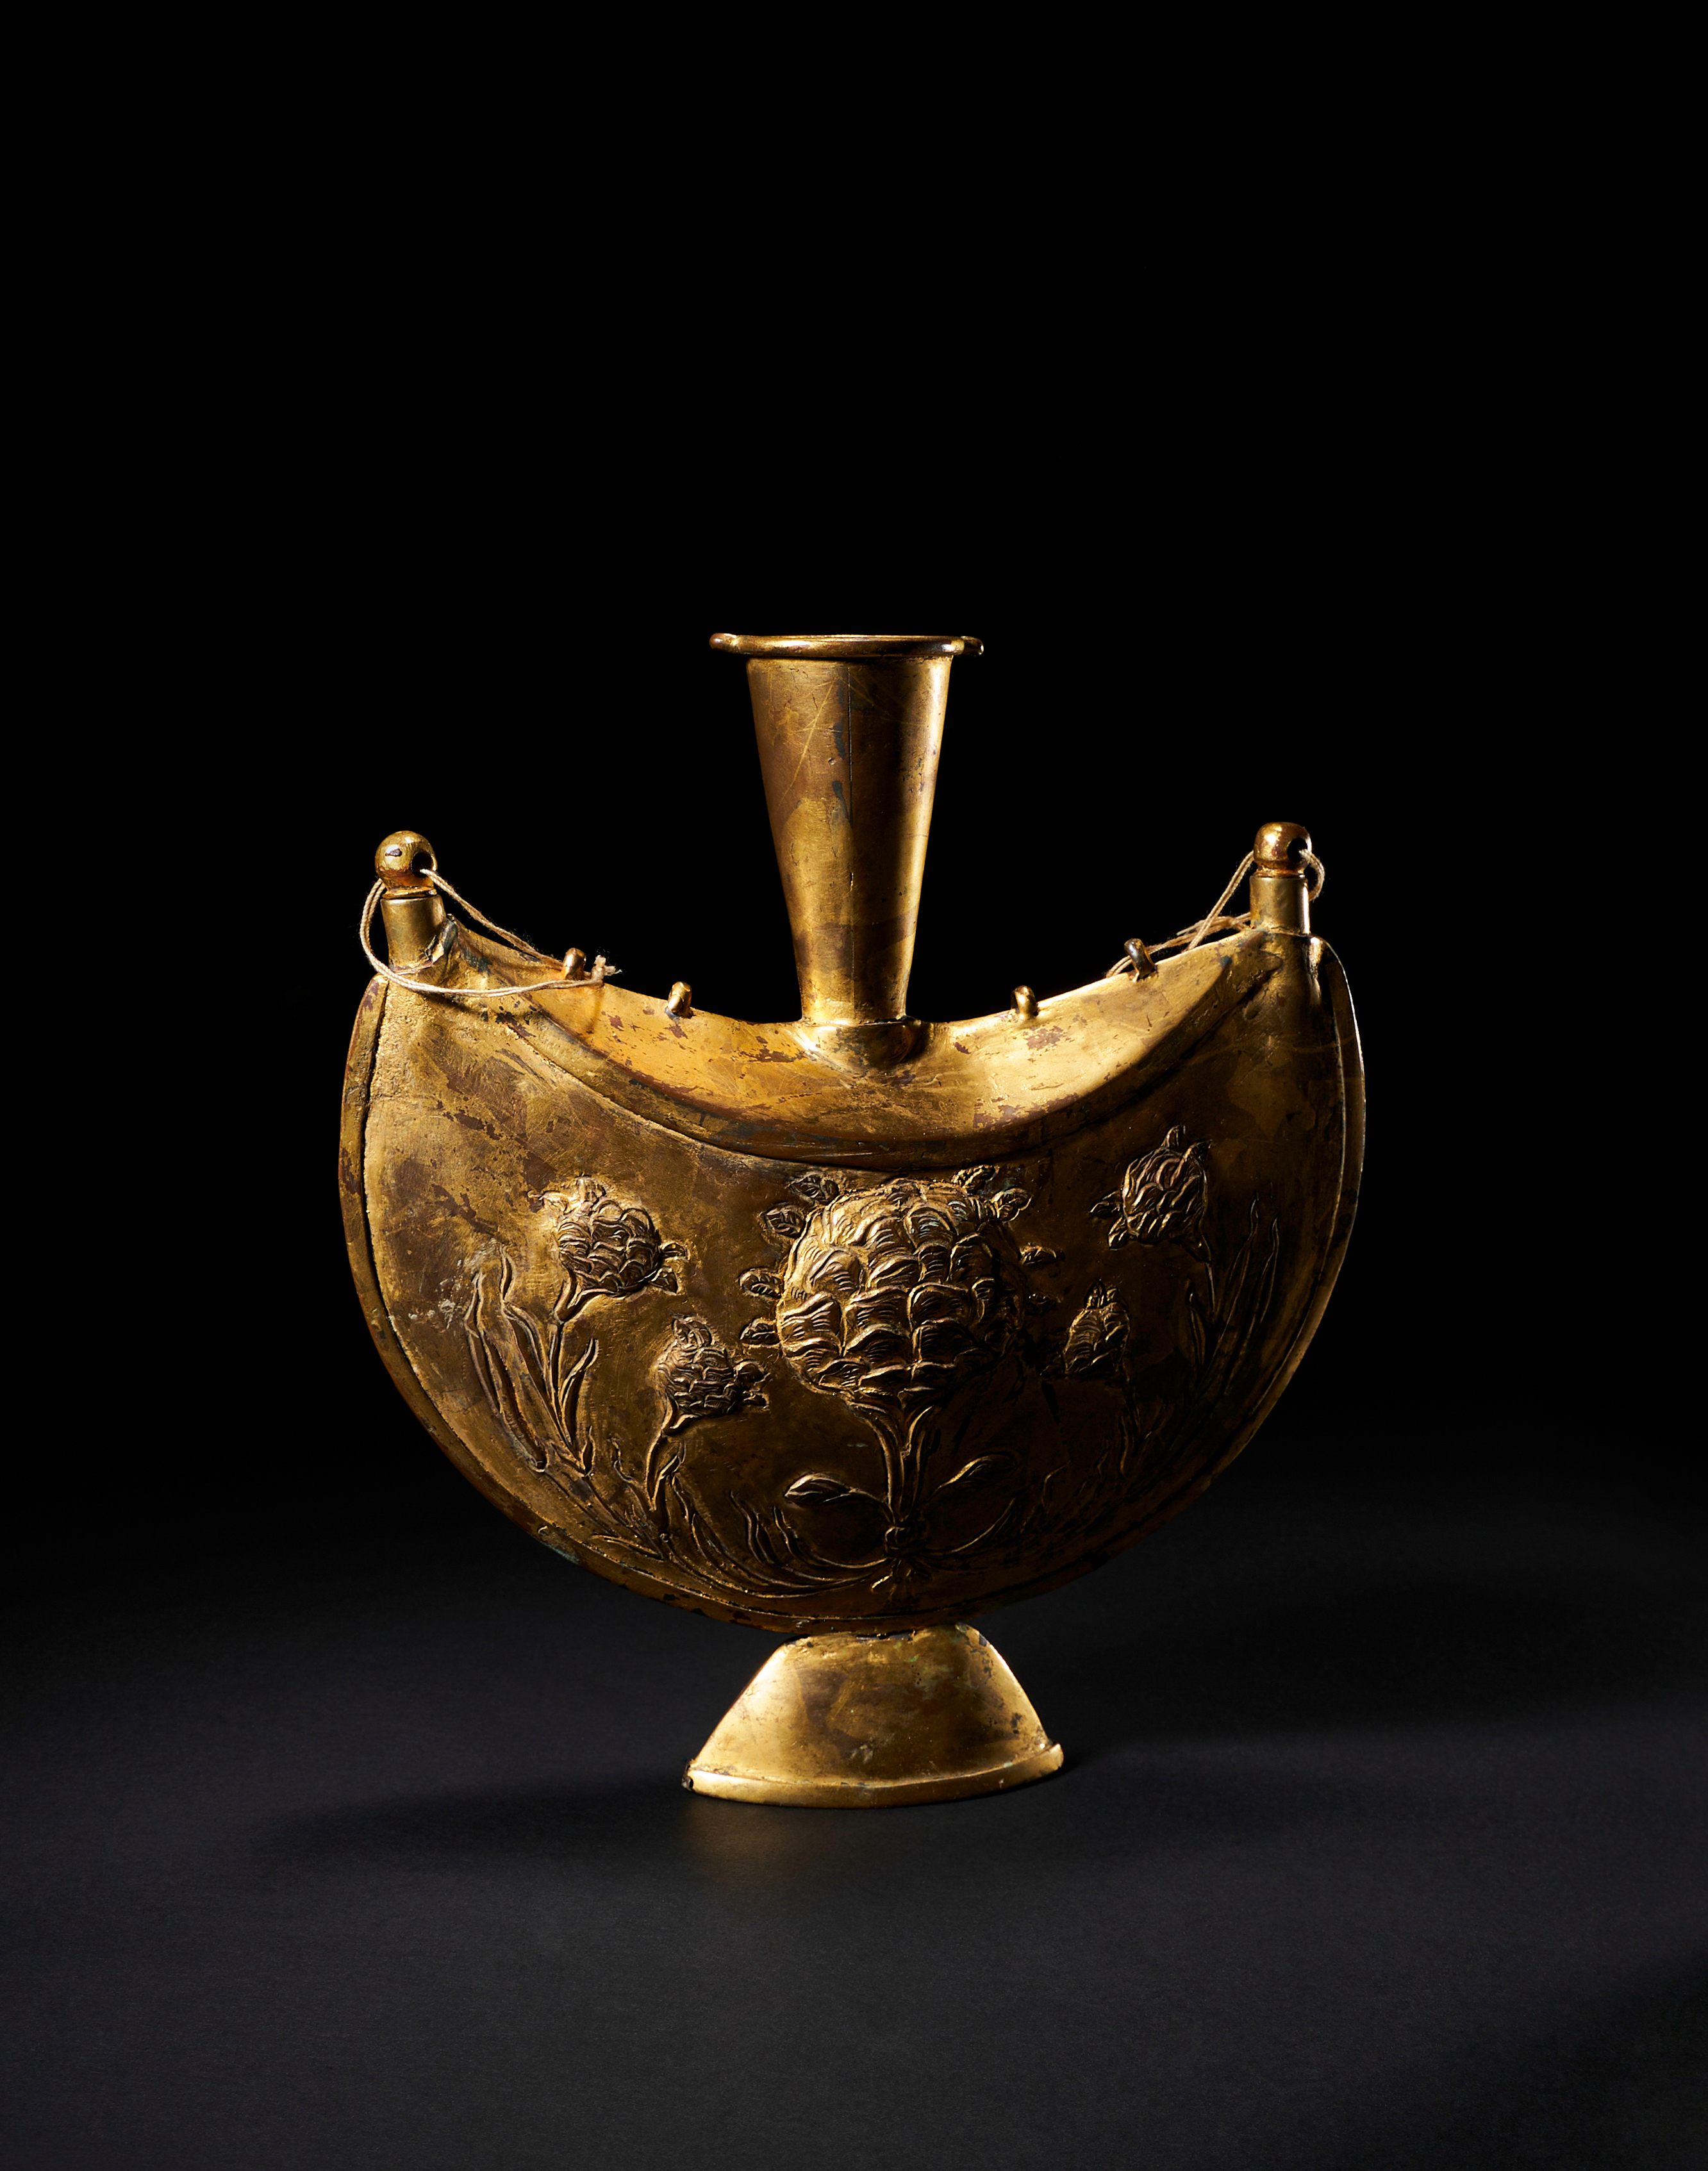 AN OTTOMAN OR MUGHAL COPPER GILT (TOMBAK) PILGRIM FLASK, 17TH CENTURY, DECCAN OR OTTOMAN - Image 3 of 3